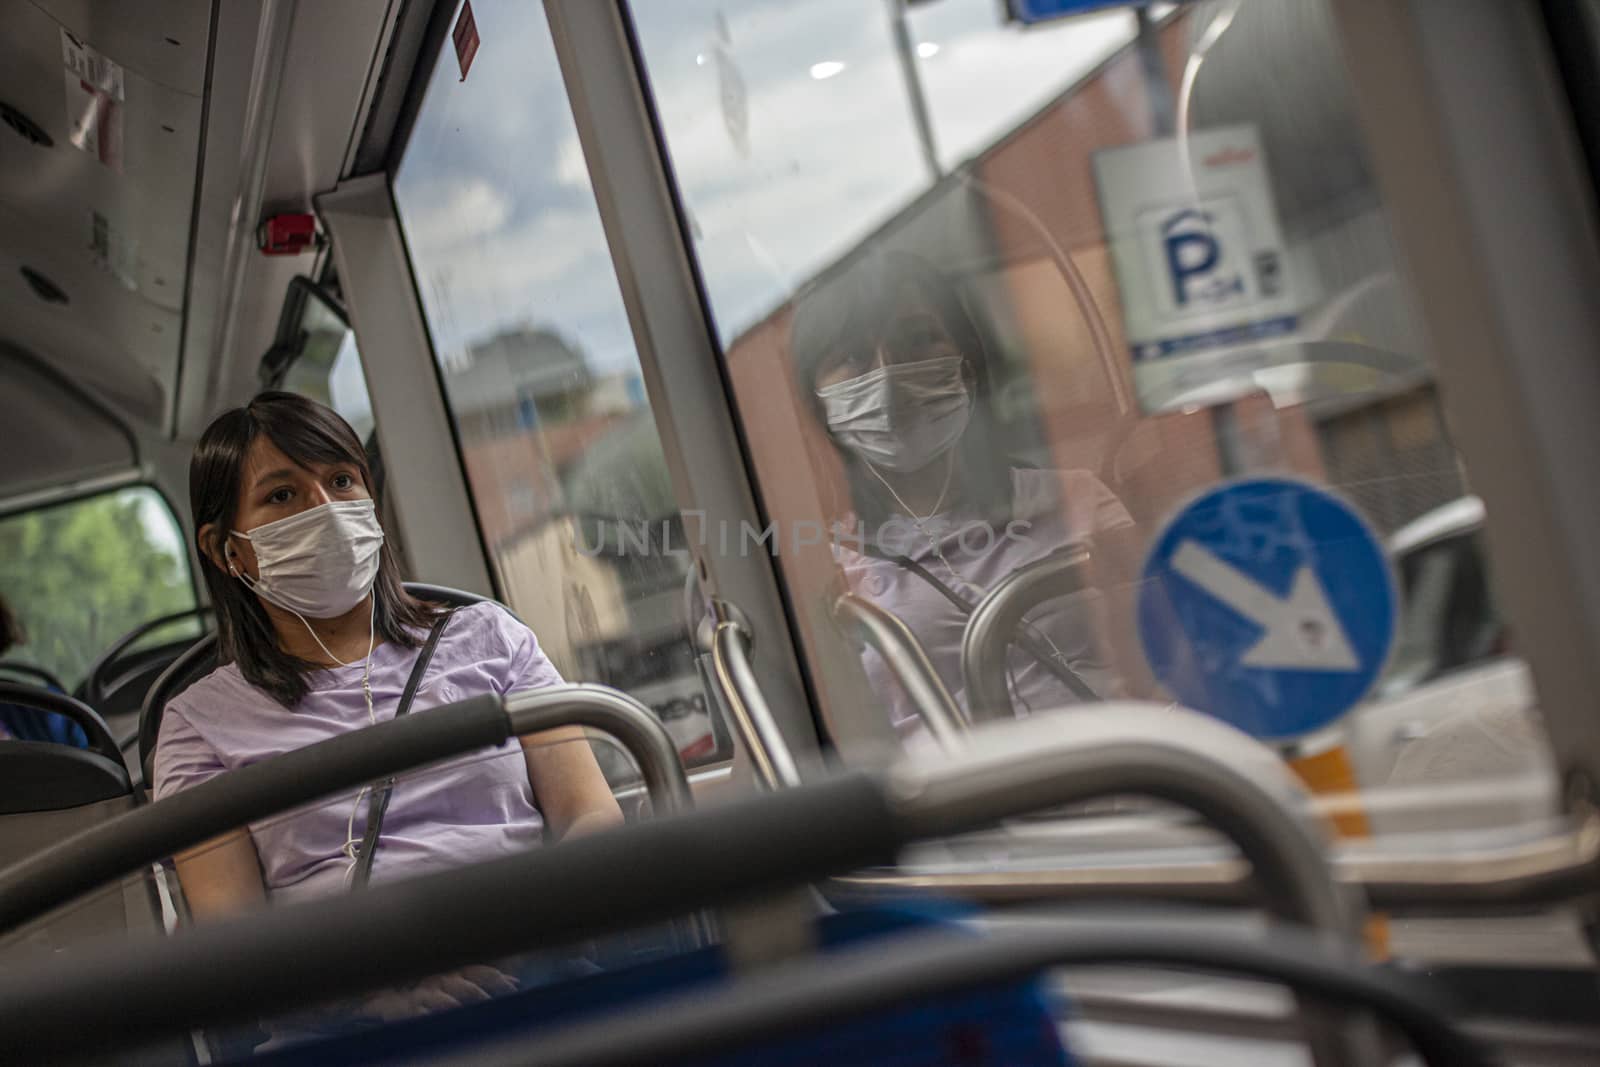 Girl in the bus with medical mask during Covid quarantine 2 by pippocarlot